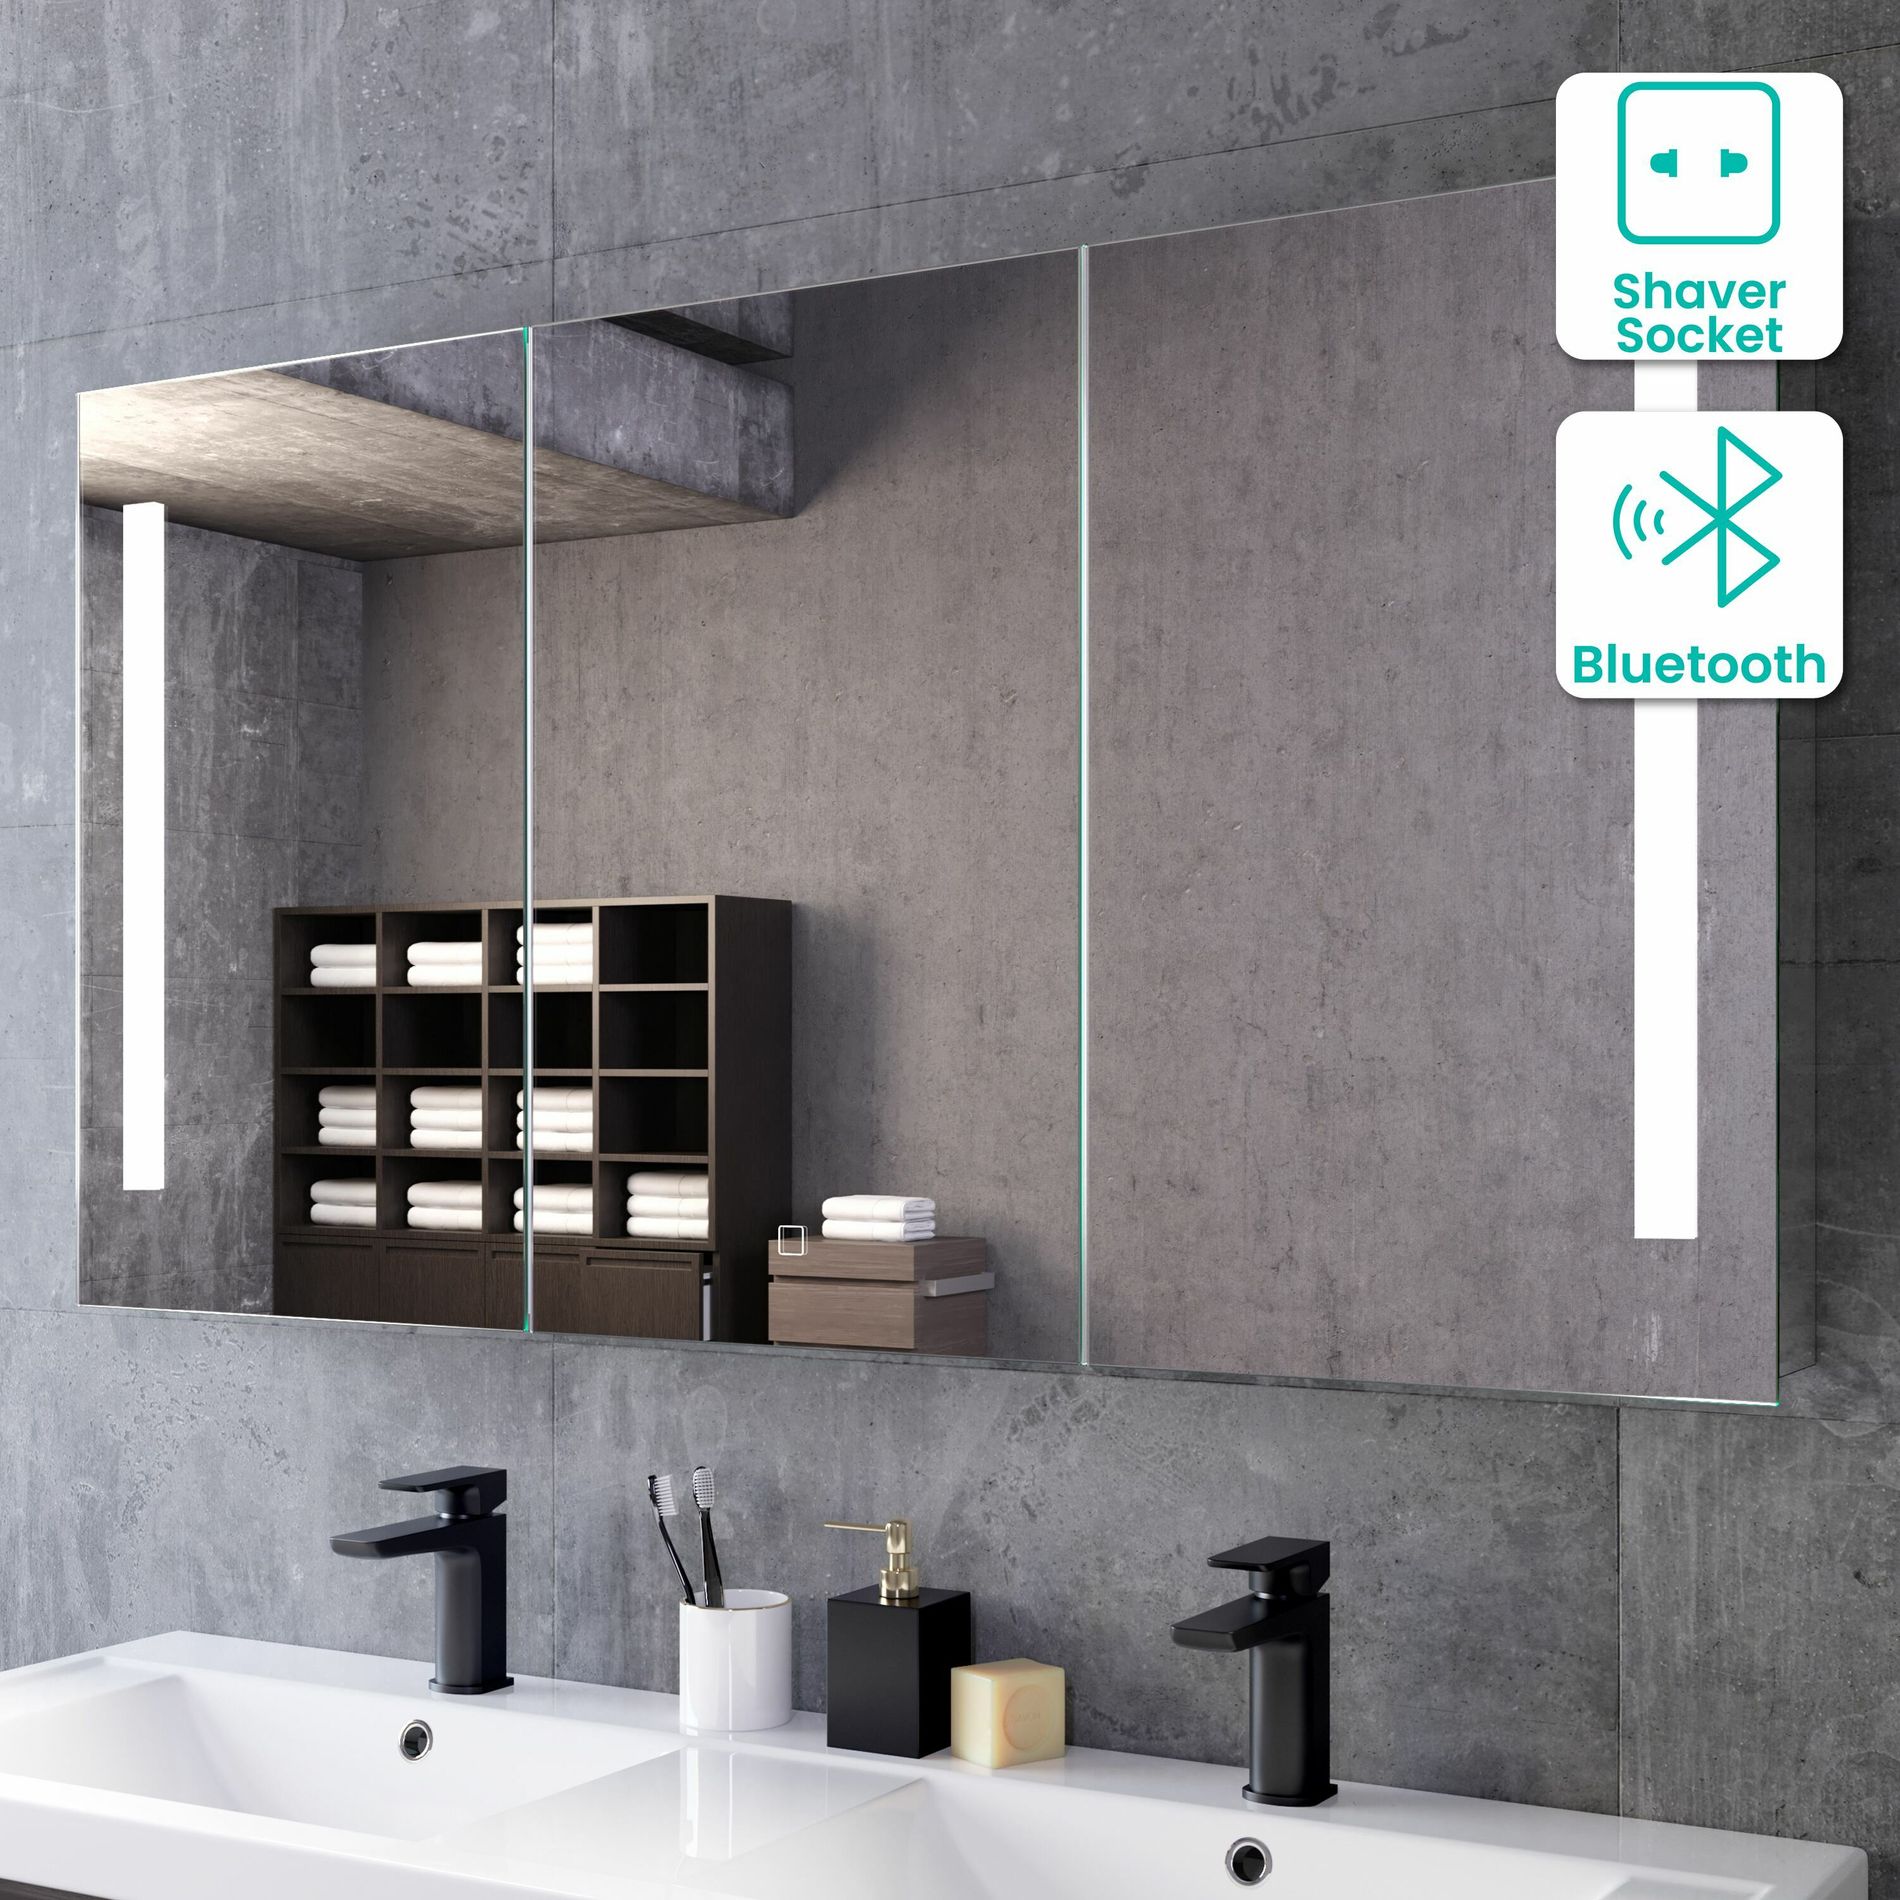 Bathroom Cabinet Storage Mirror with Bluetooth Speaker Demister Wall Mounted UK 